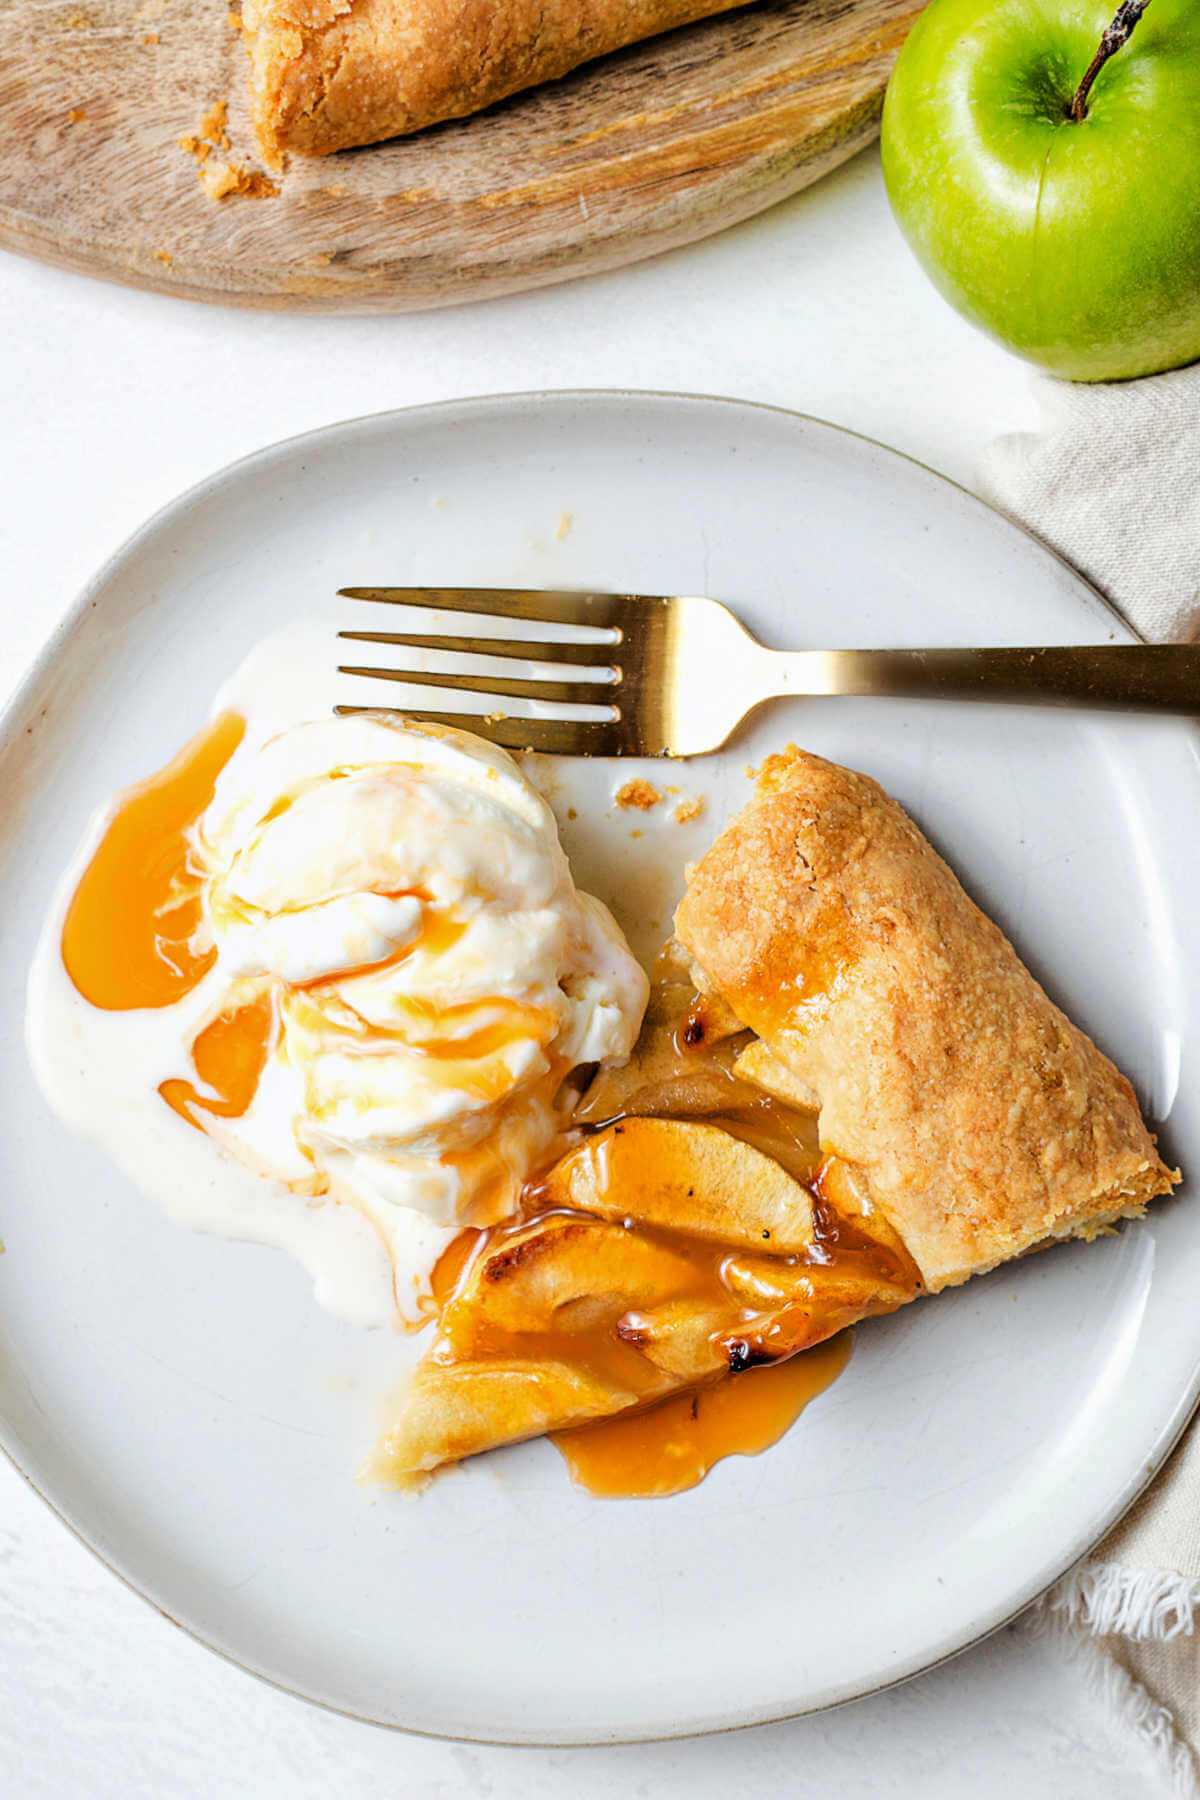 a slice of rustic apple tart on a plate with ice cream and caramel syrup.